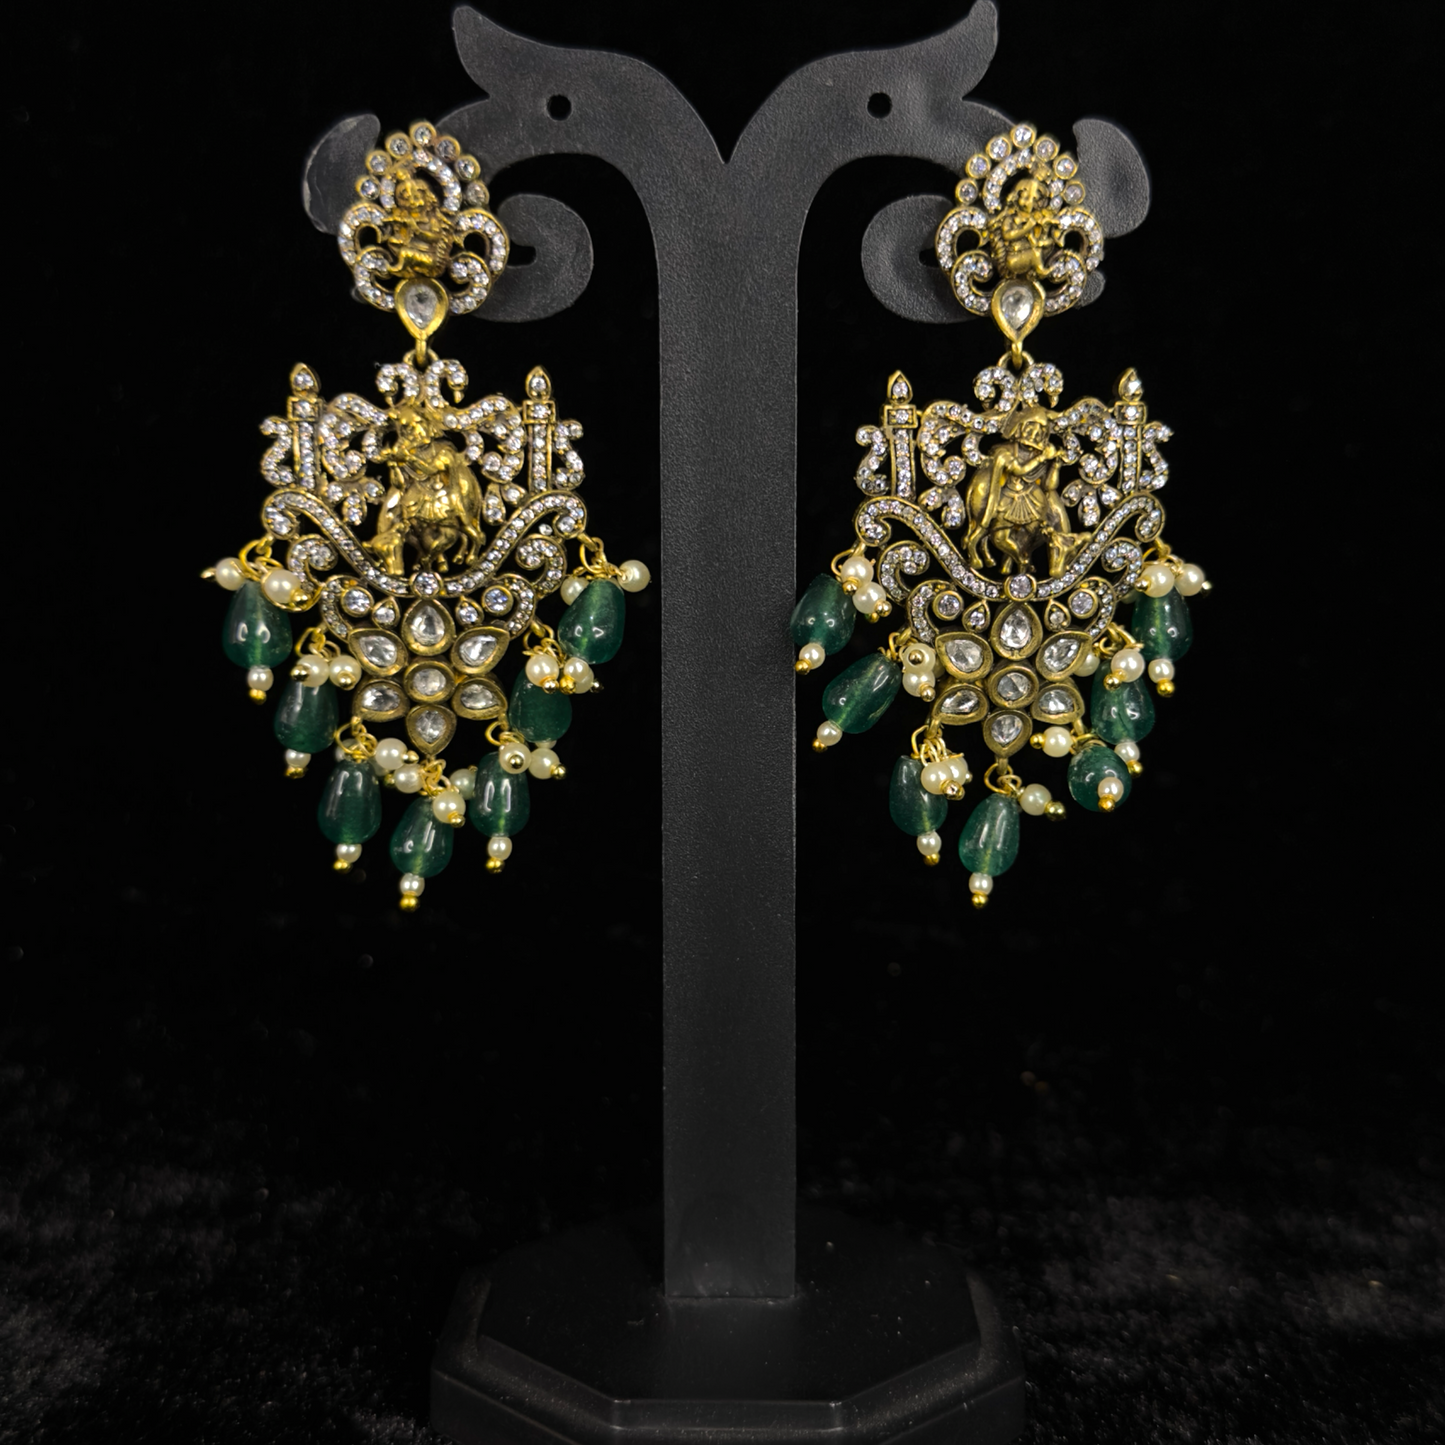 Temple Design Victorian  Pushback Earrings with Russian beads